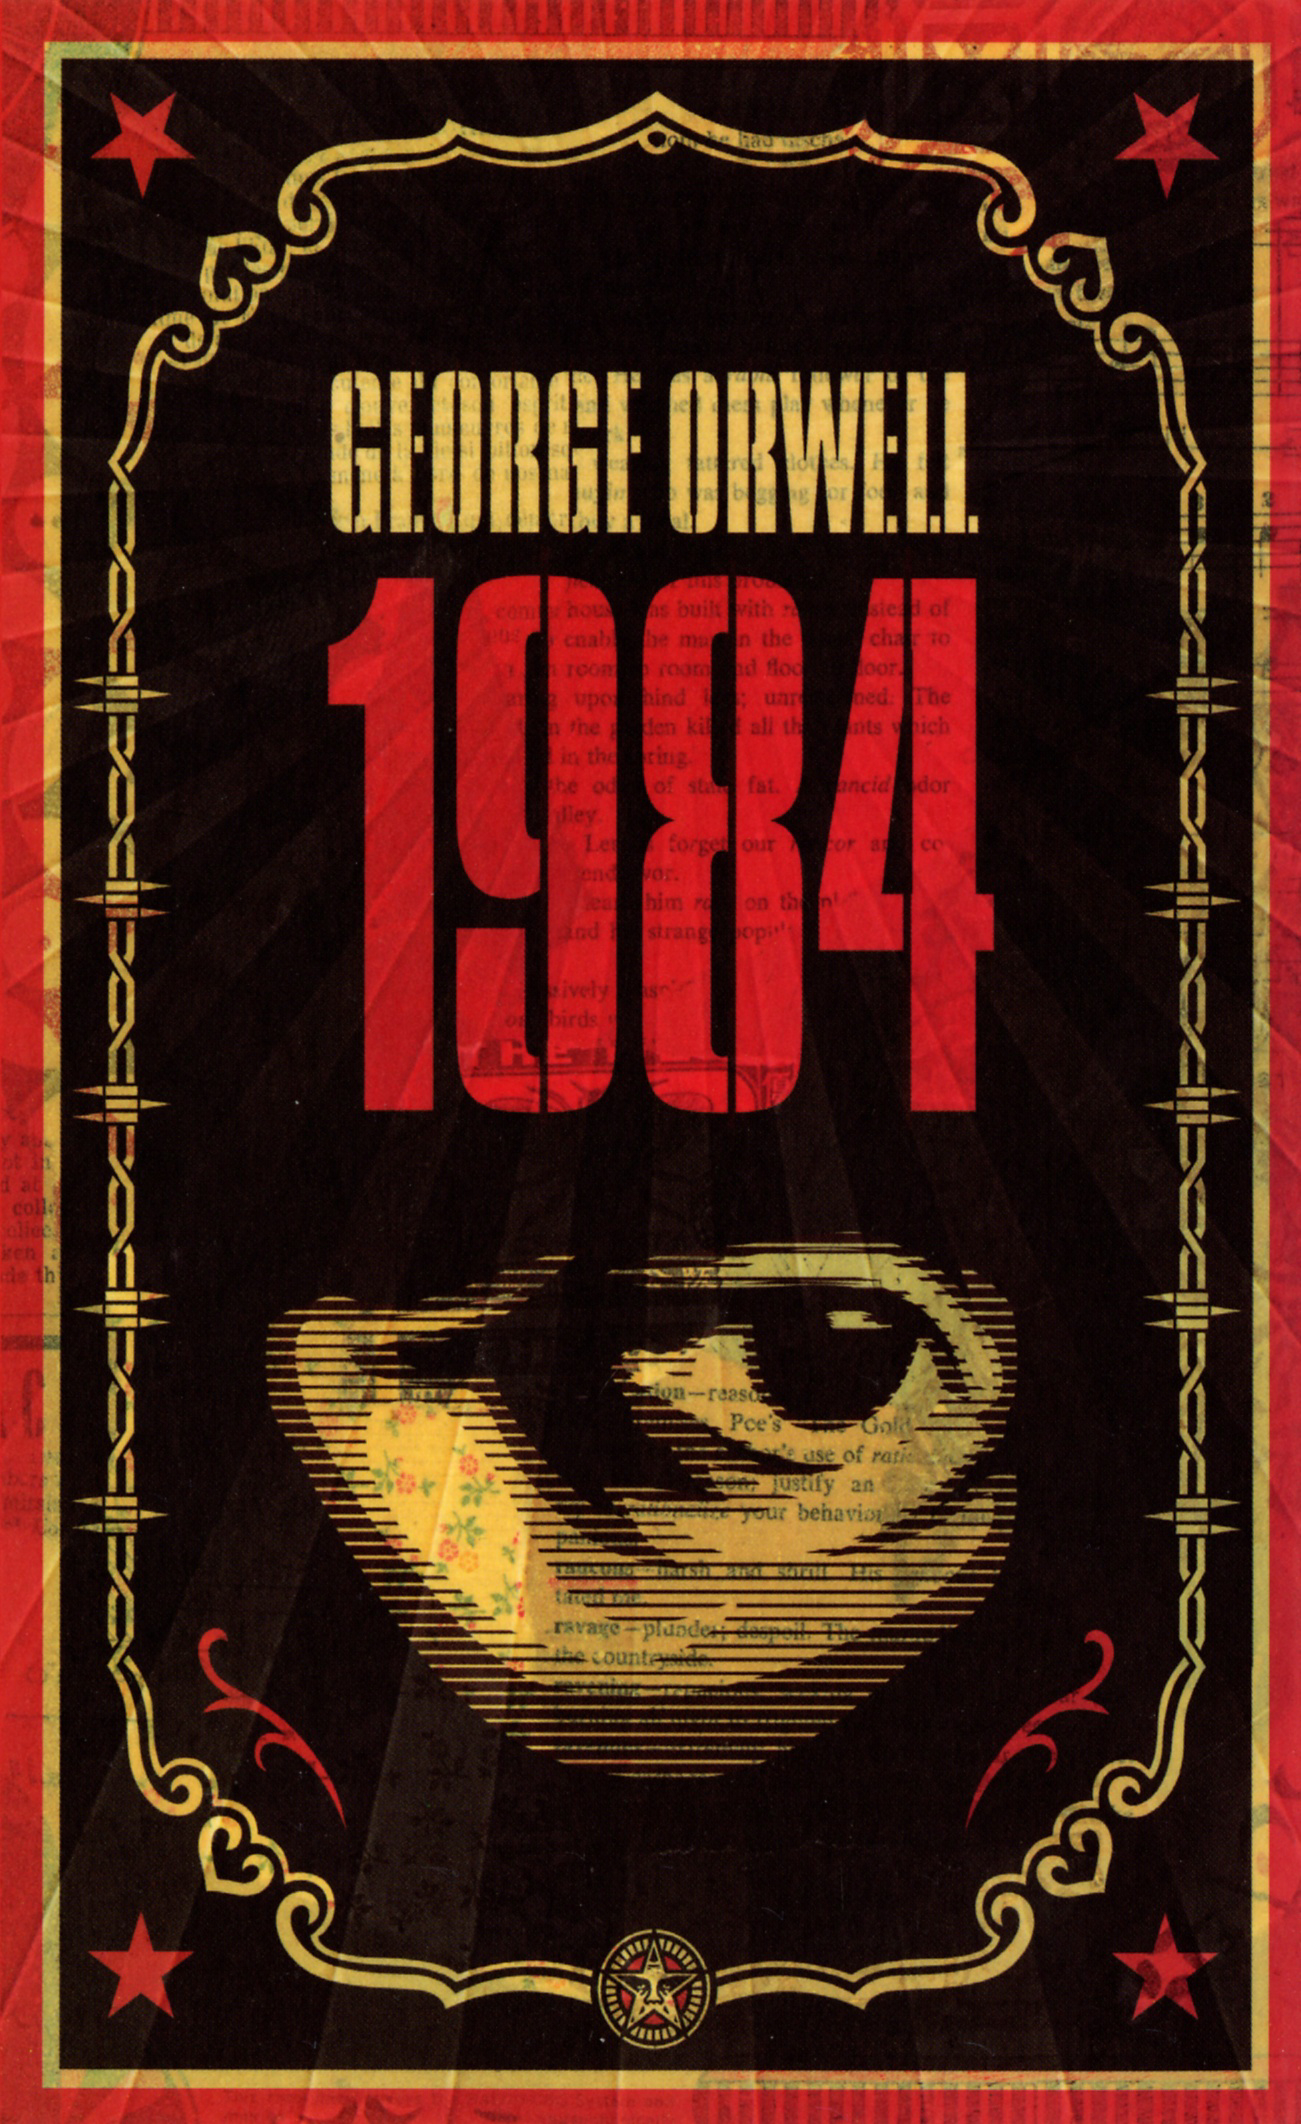 Book “1984 (Nineteen Eighty-Four)” by George Orwell — June 8, 1949